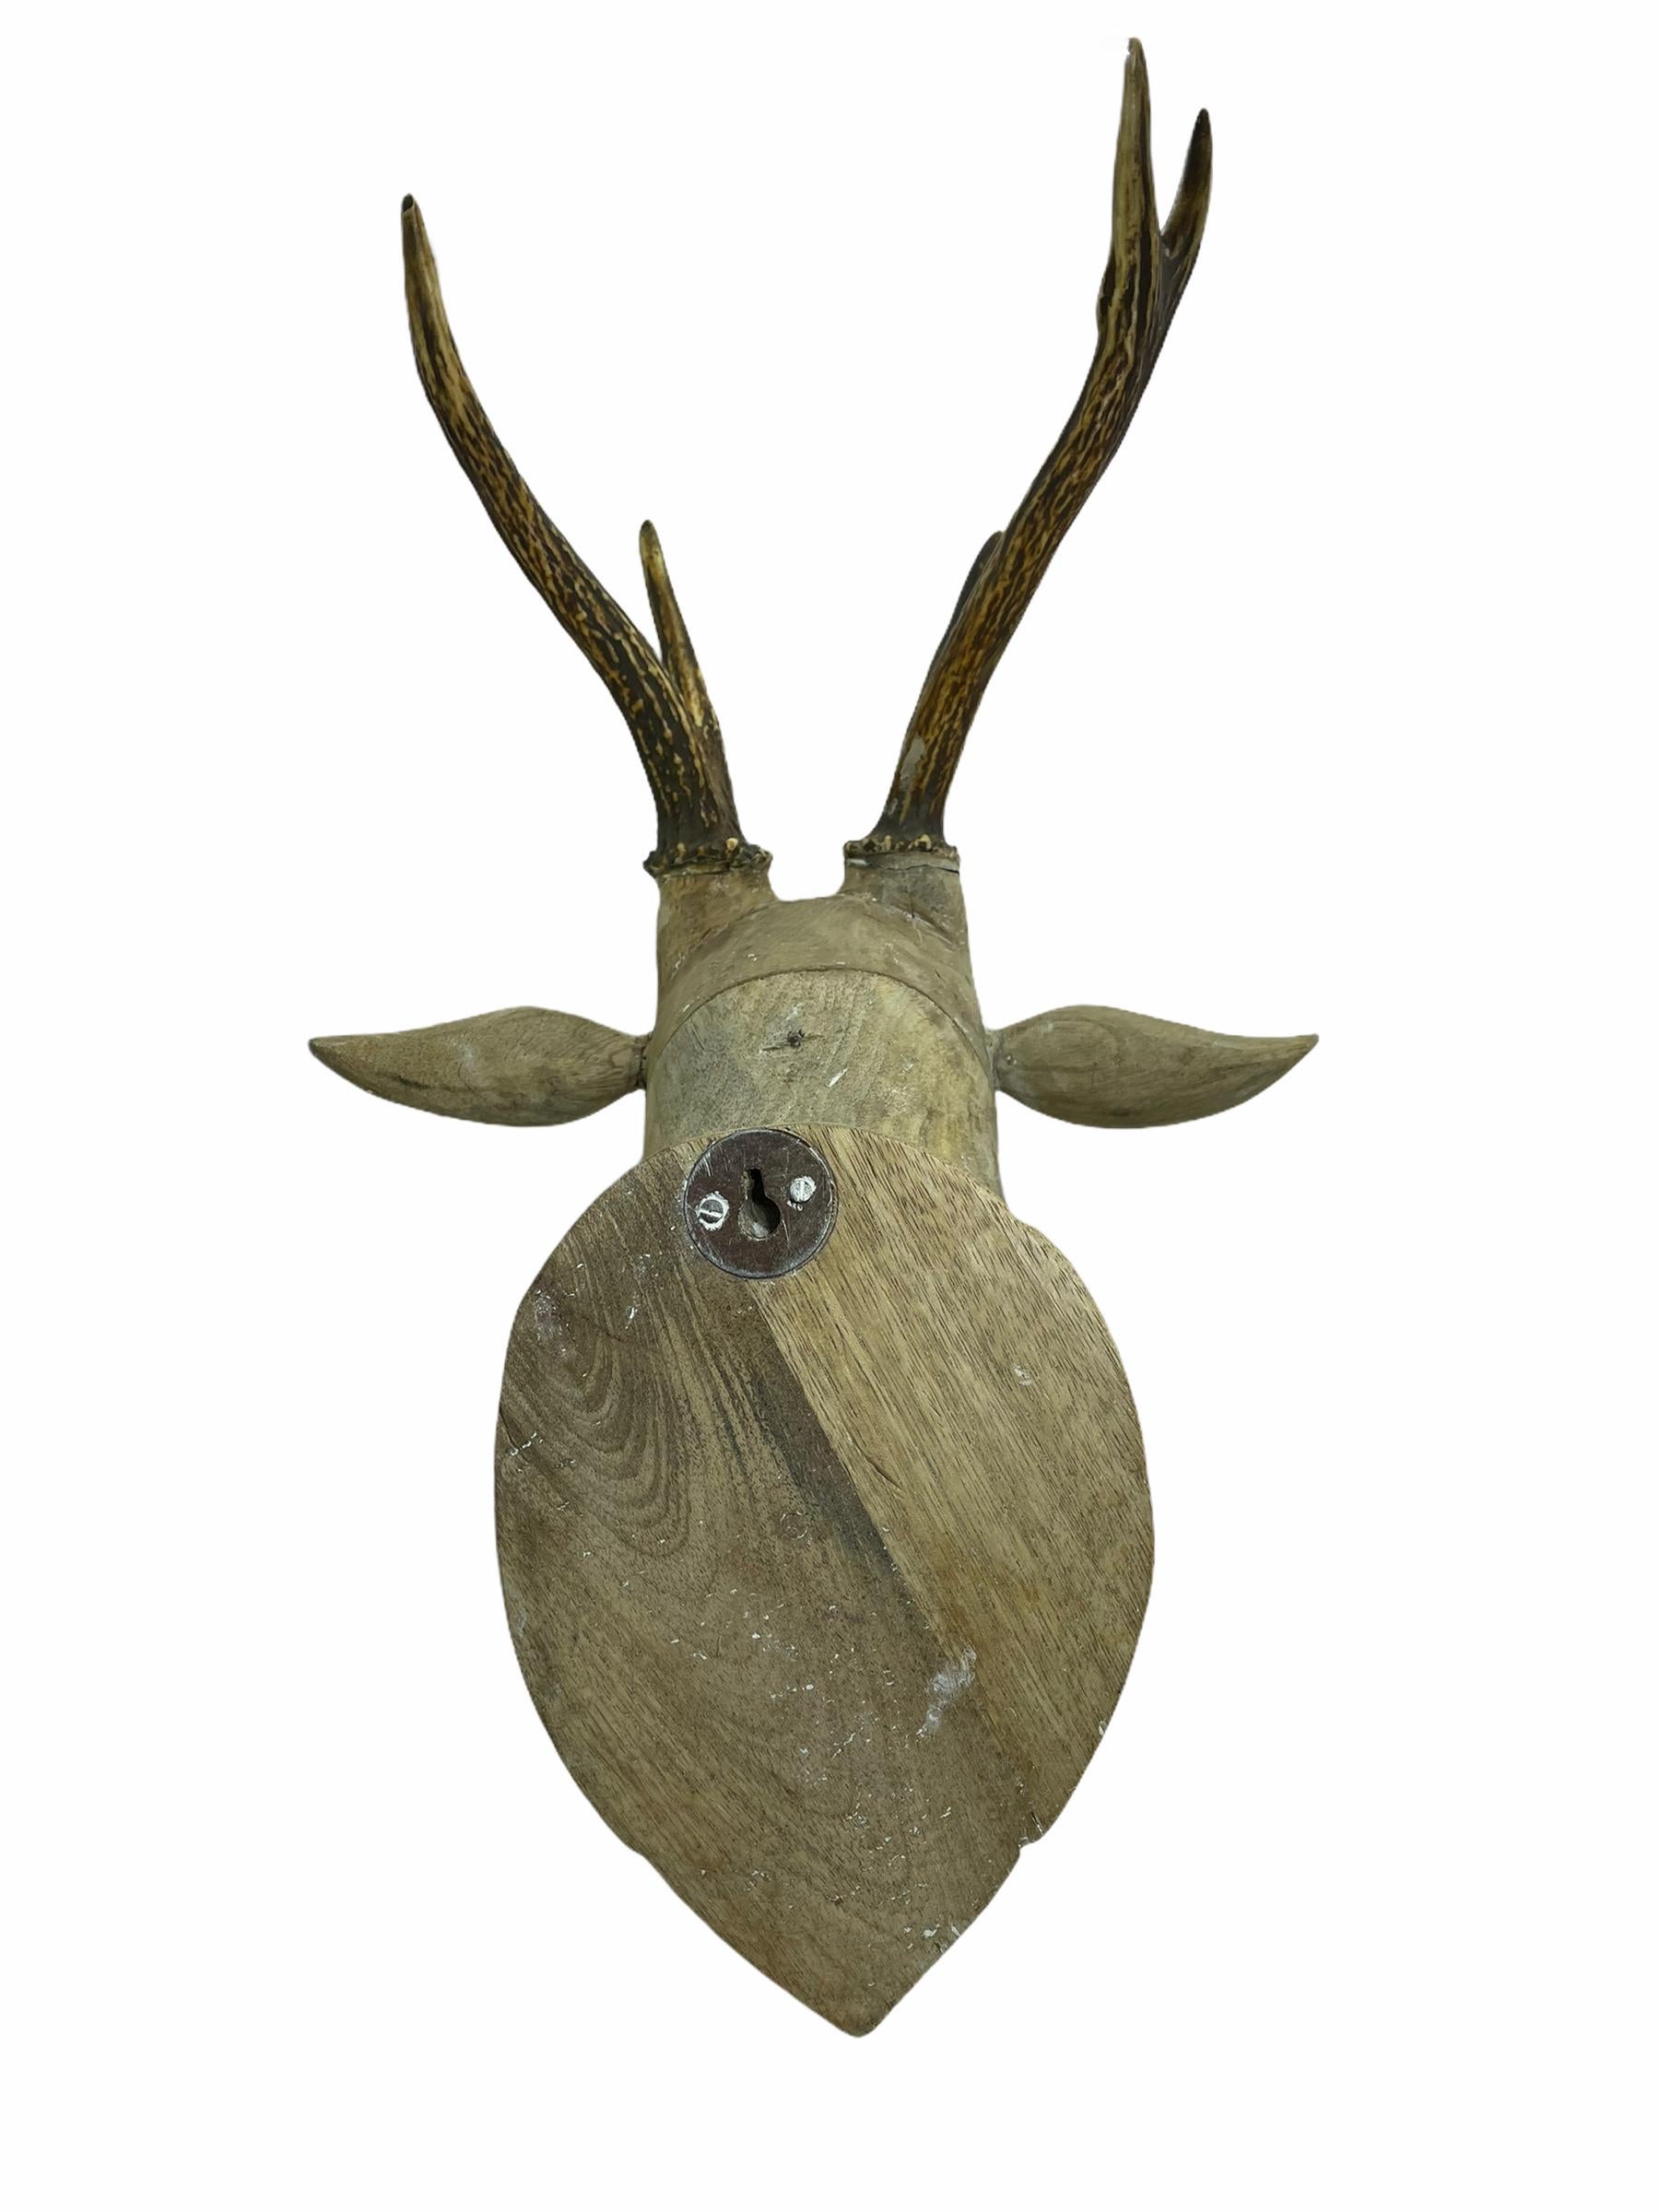 Large Folk Art Carved Wood Deer Head with Real Antlers, 19th Century 5